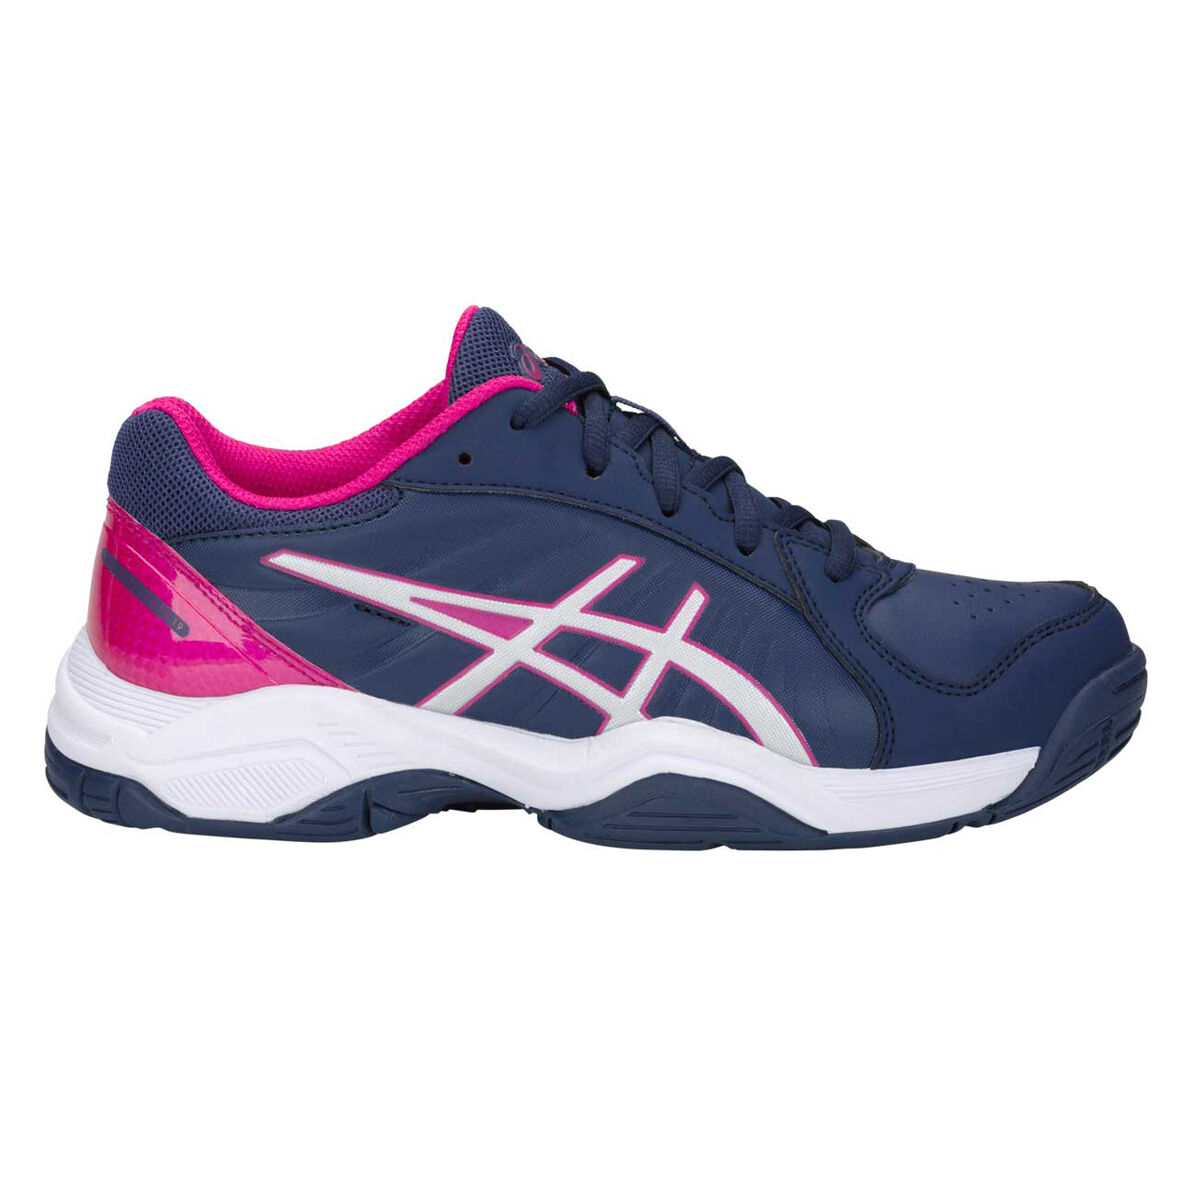 netball shoes online